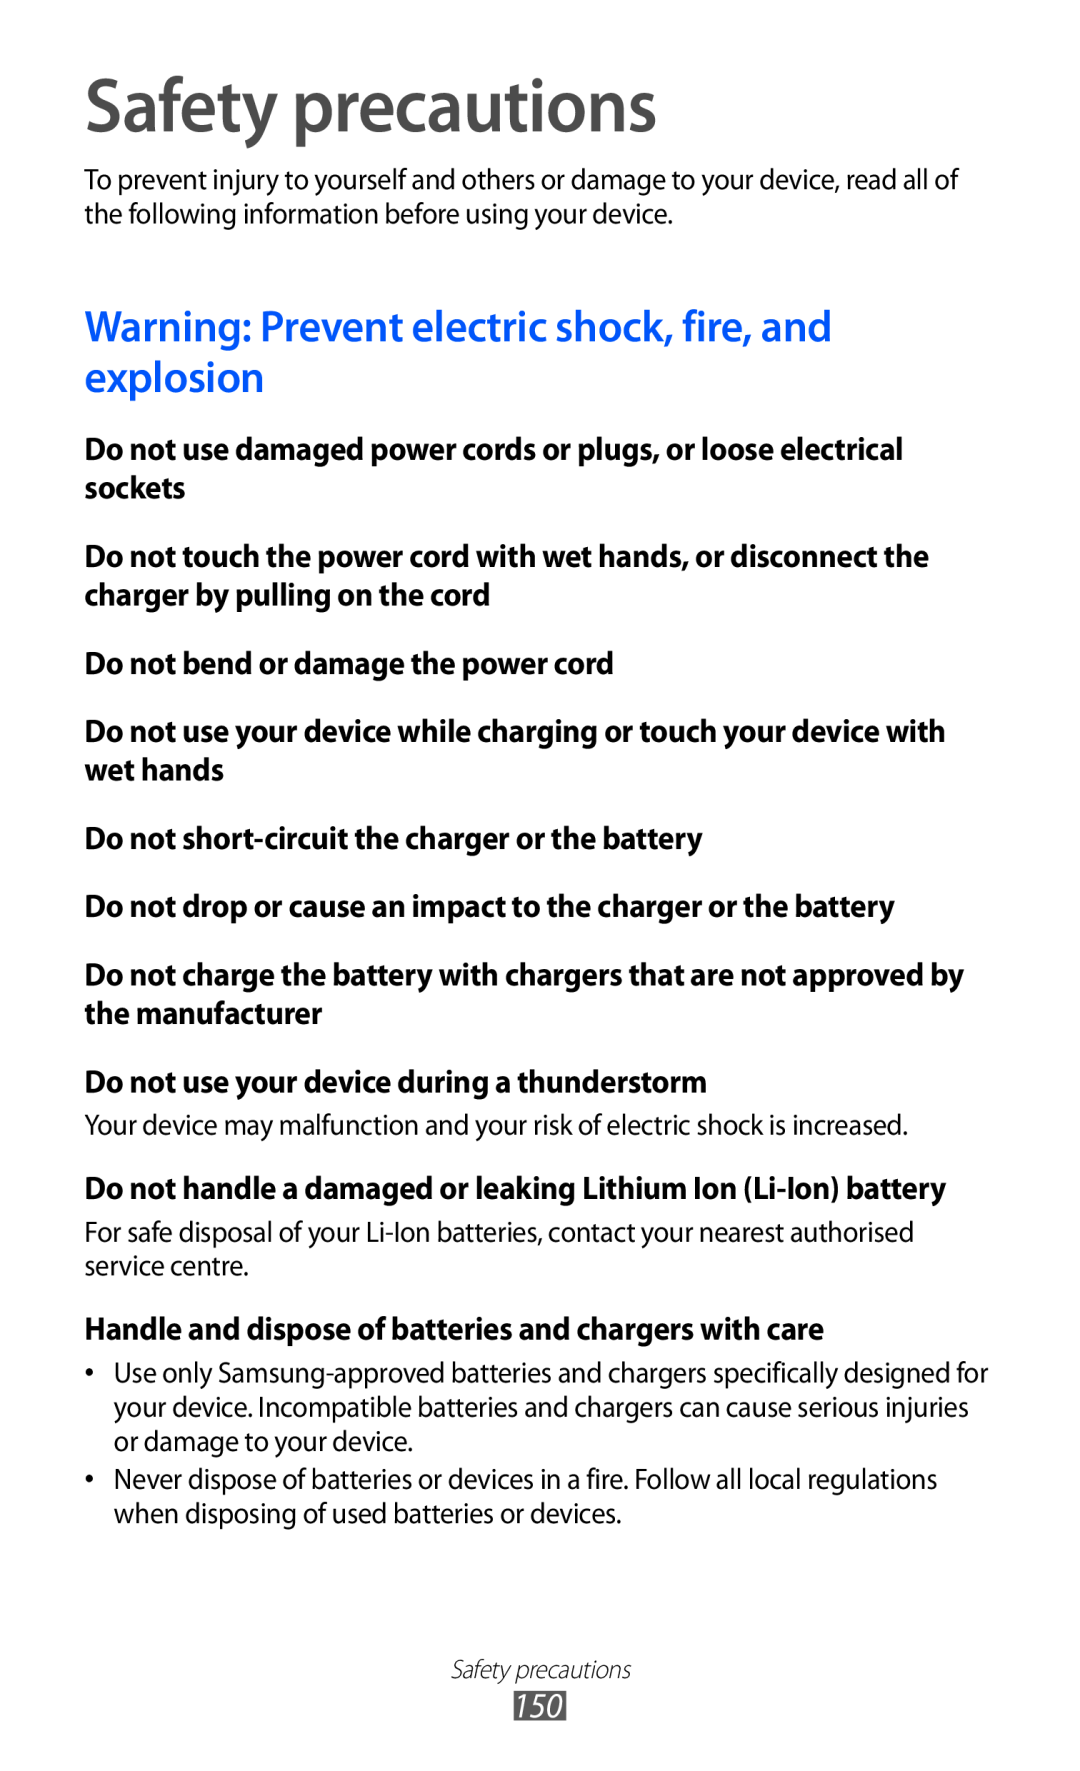 Samsung GT-I9070 user manual Safety precautions, Warning Prevent electric shock, fire, and explosion 